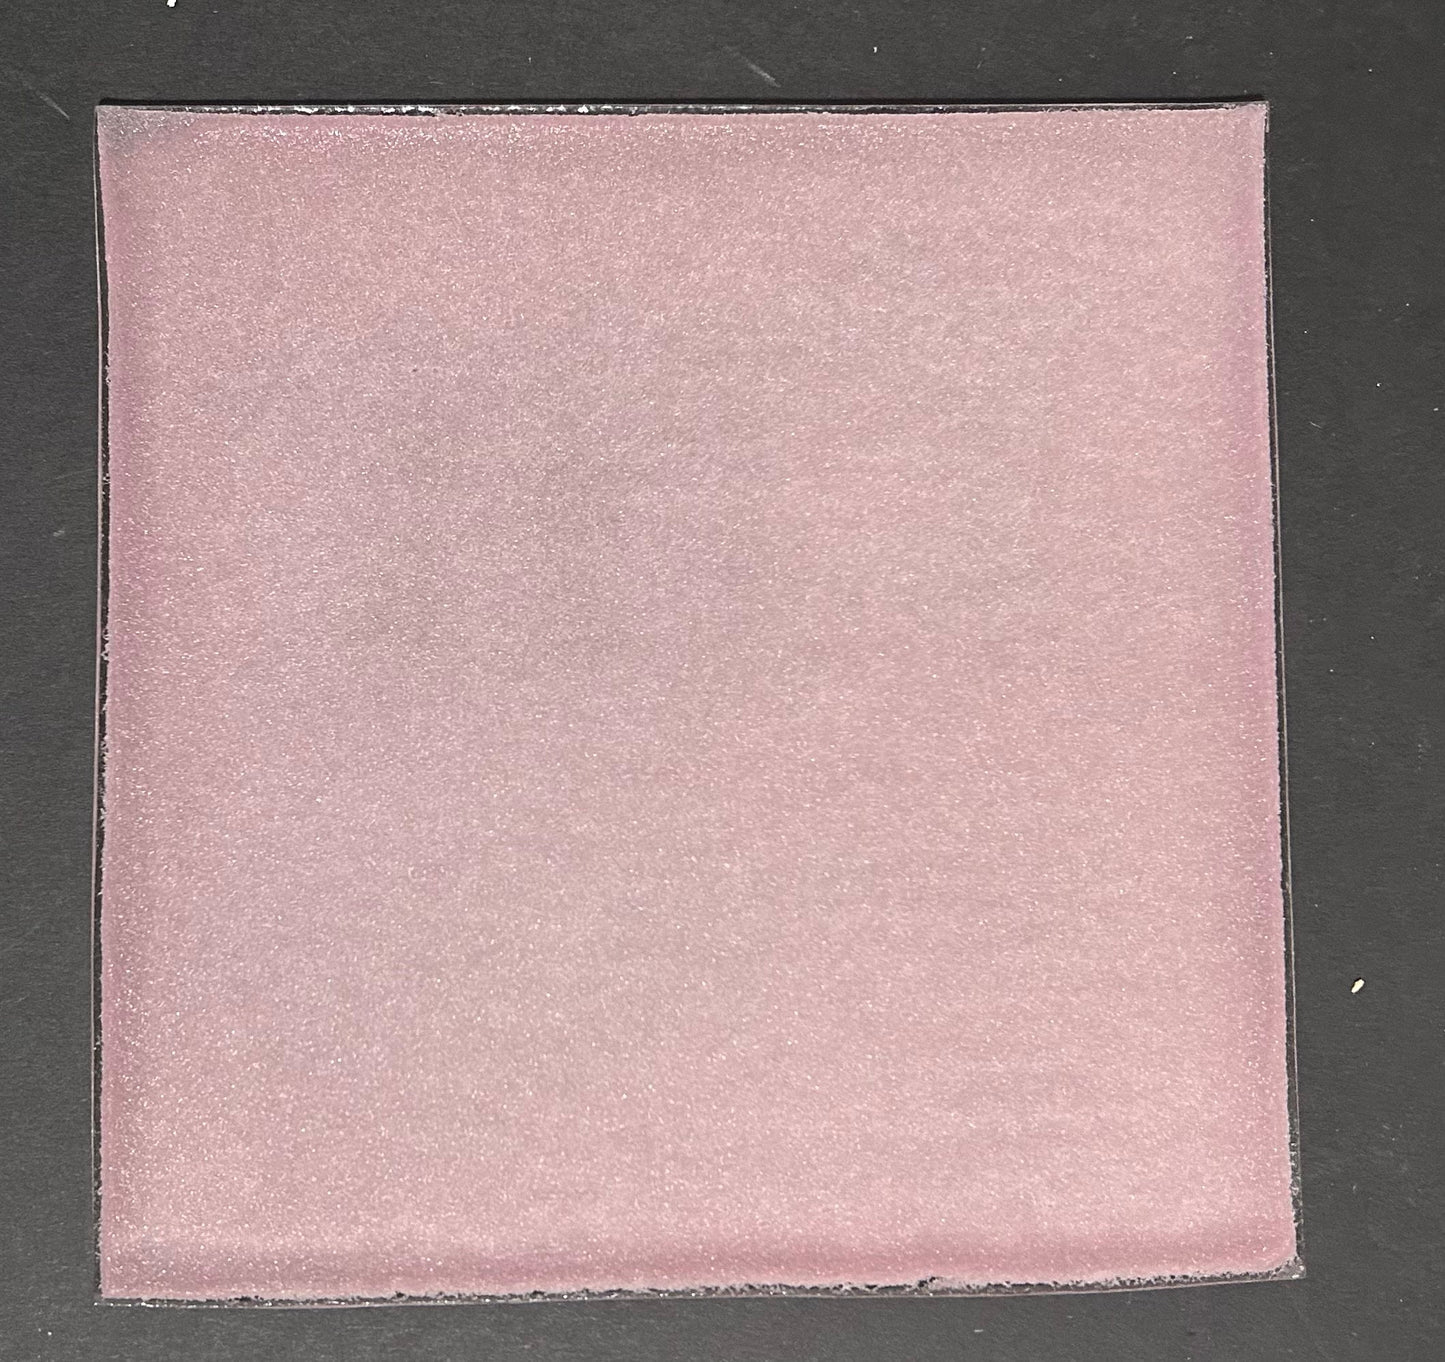 COE 90 / Azure  Glow in the Dark sheet glass/ Pink during the day, Azure glow at night/ Blue Cotton Candy